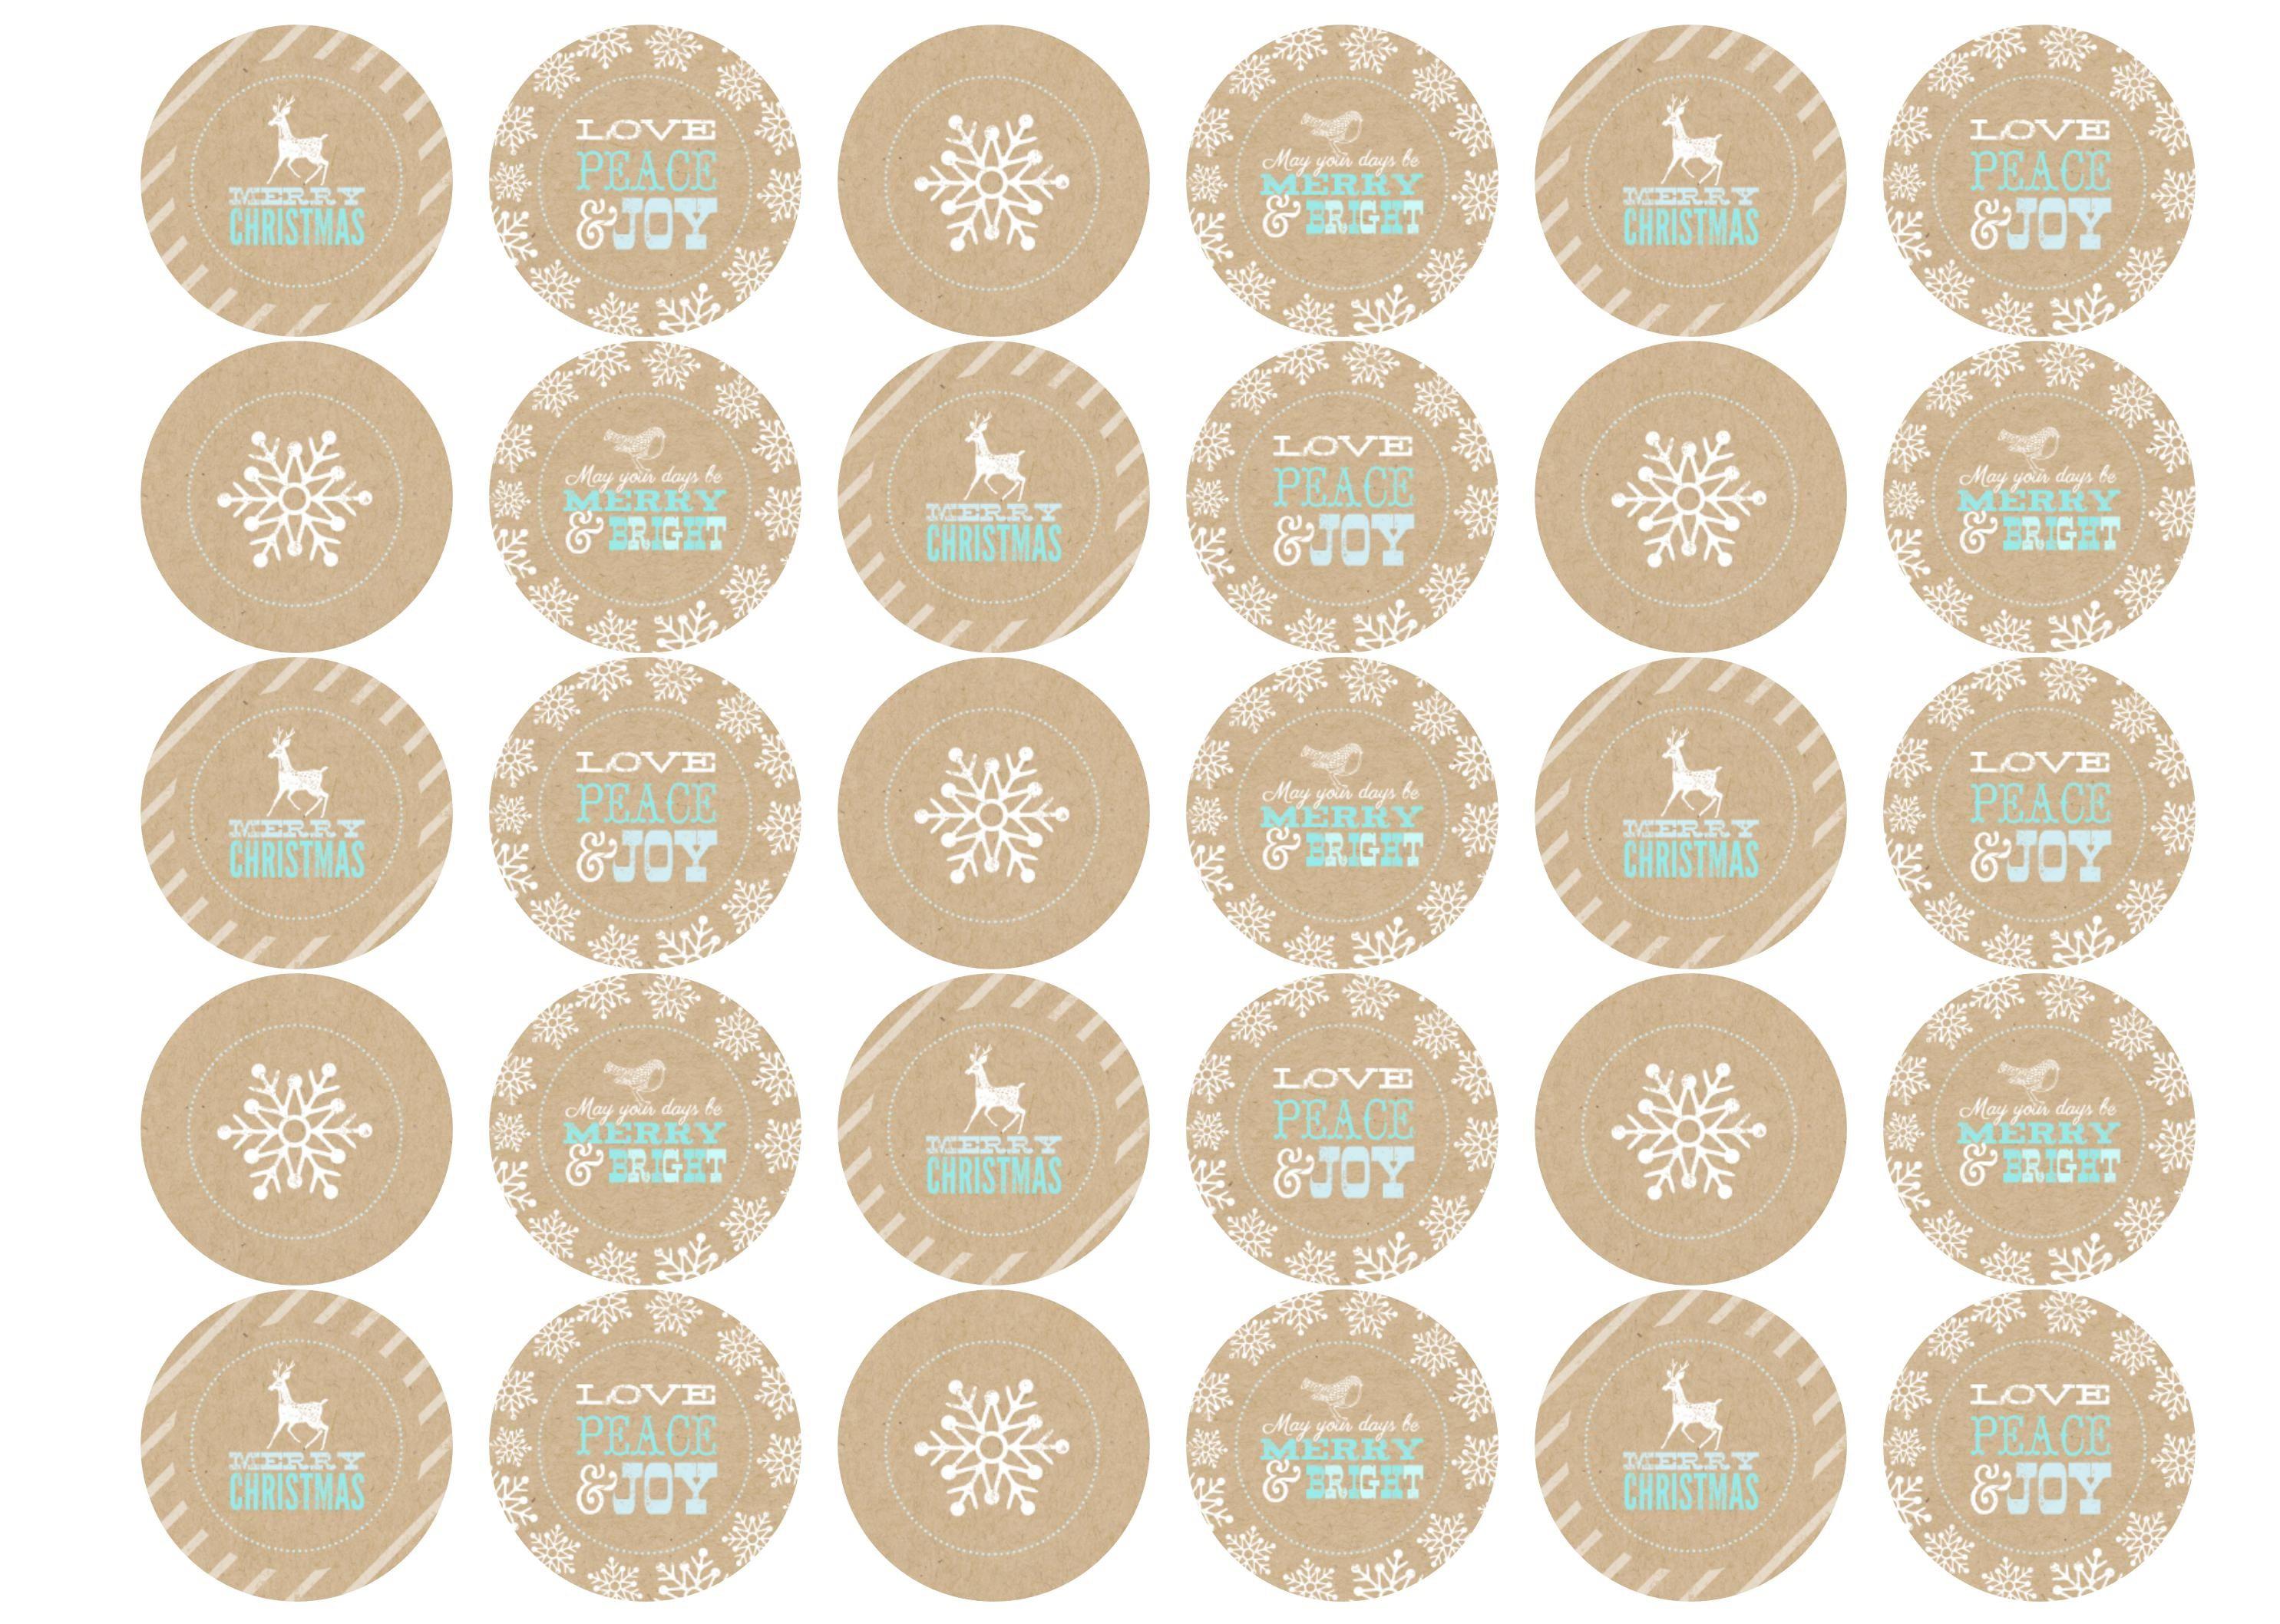 Printed cupcake toppers featuring Christmas designs in beige, white and blue